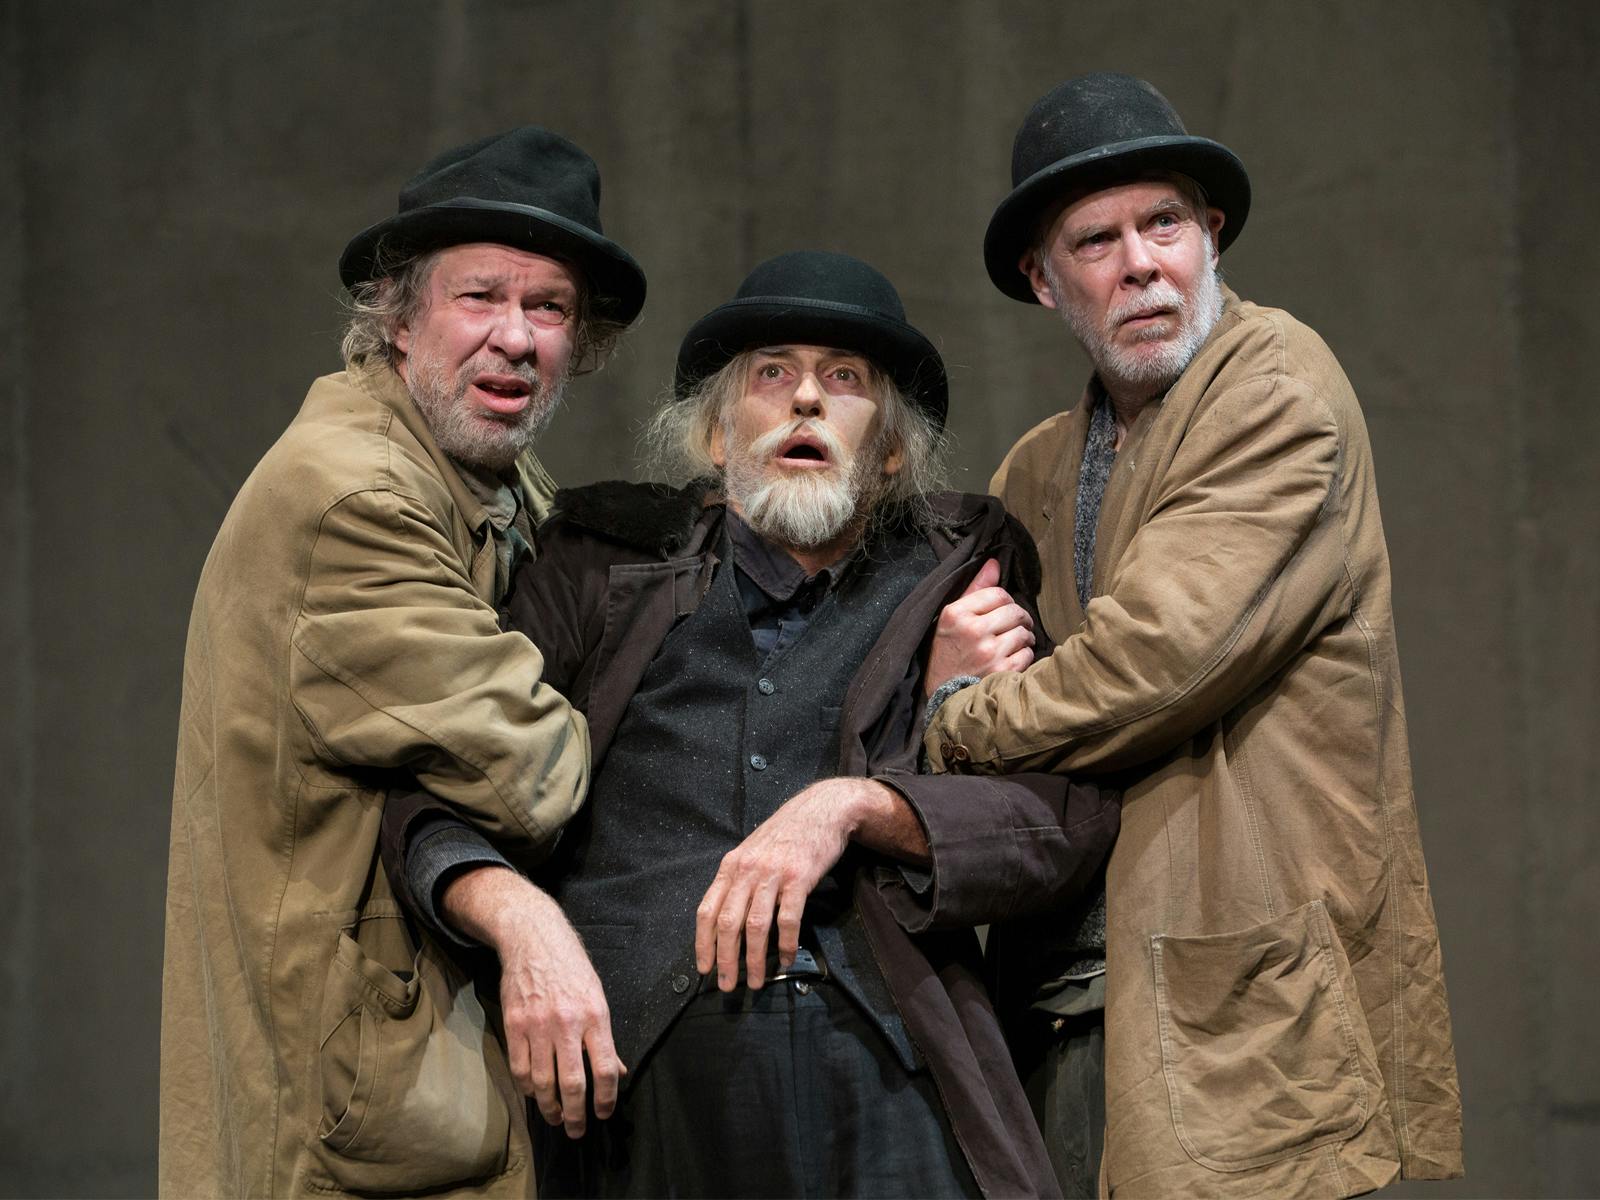 play waiting for godot